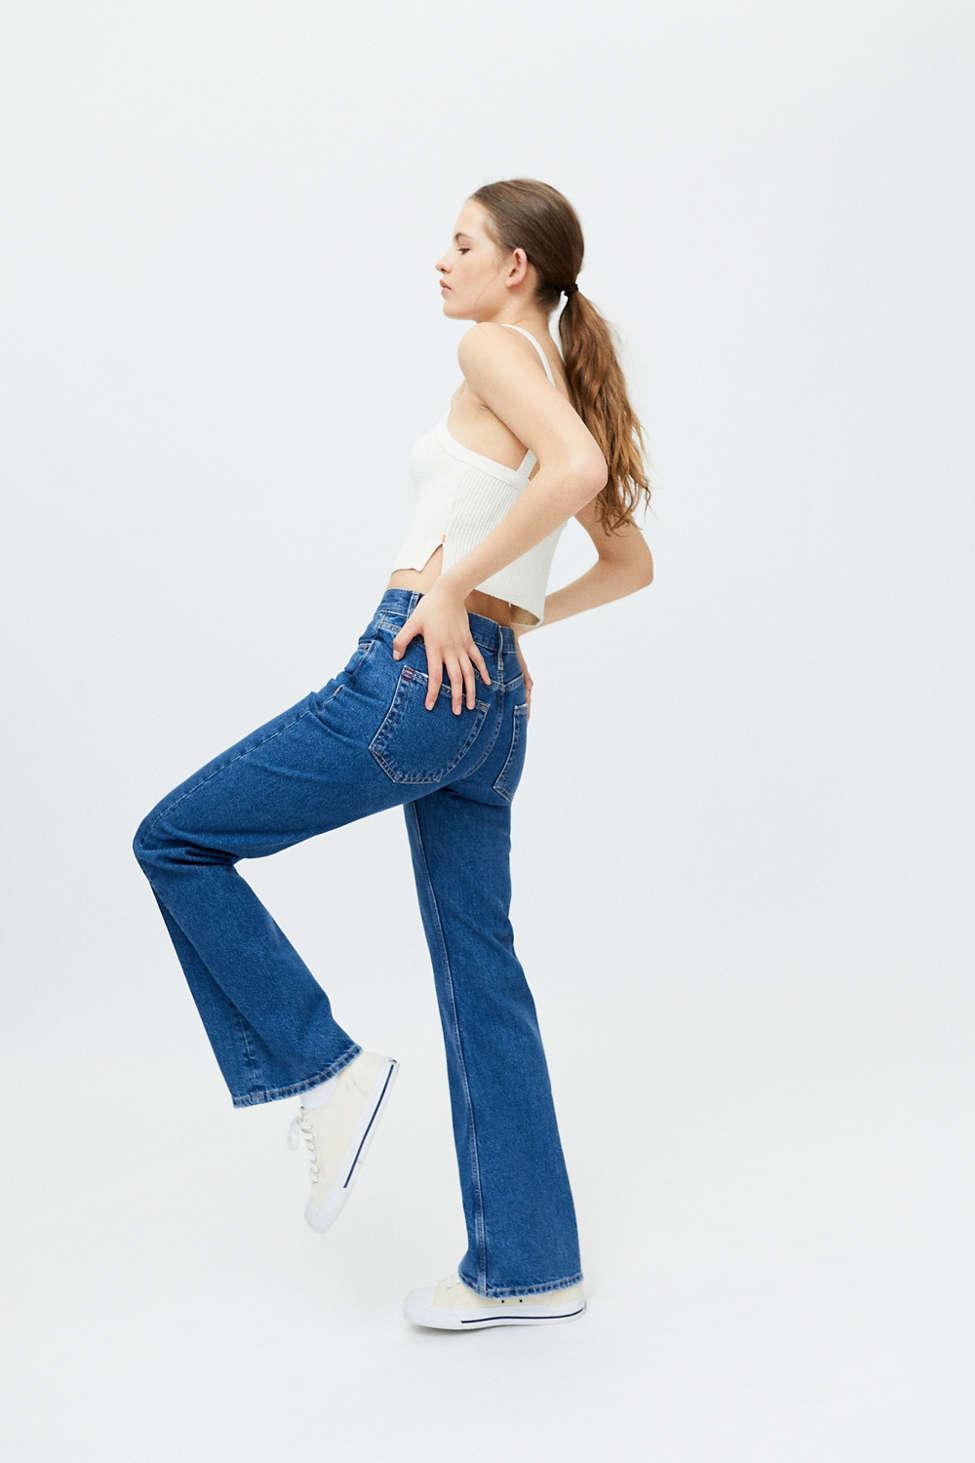 BDG '90s Mid-rise Bootcut Jean in Blue